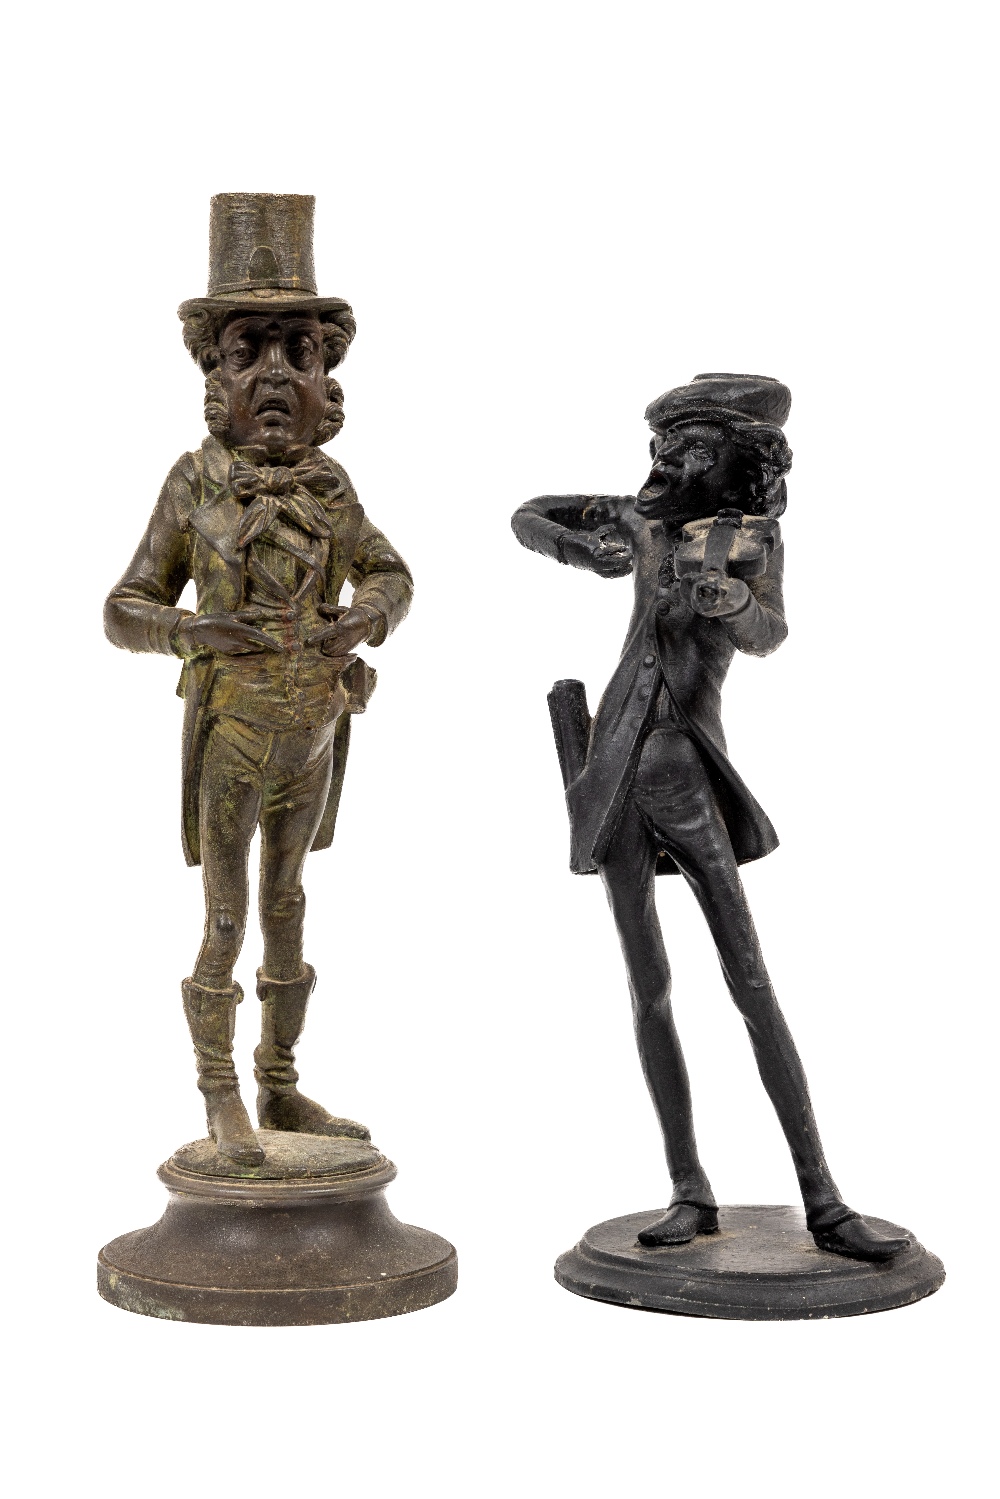 A Spelter model Candlestick, of Dickens Character, together with another similar metal